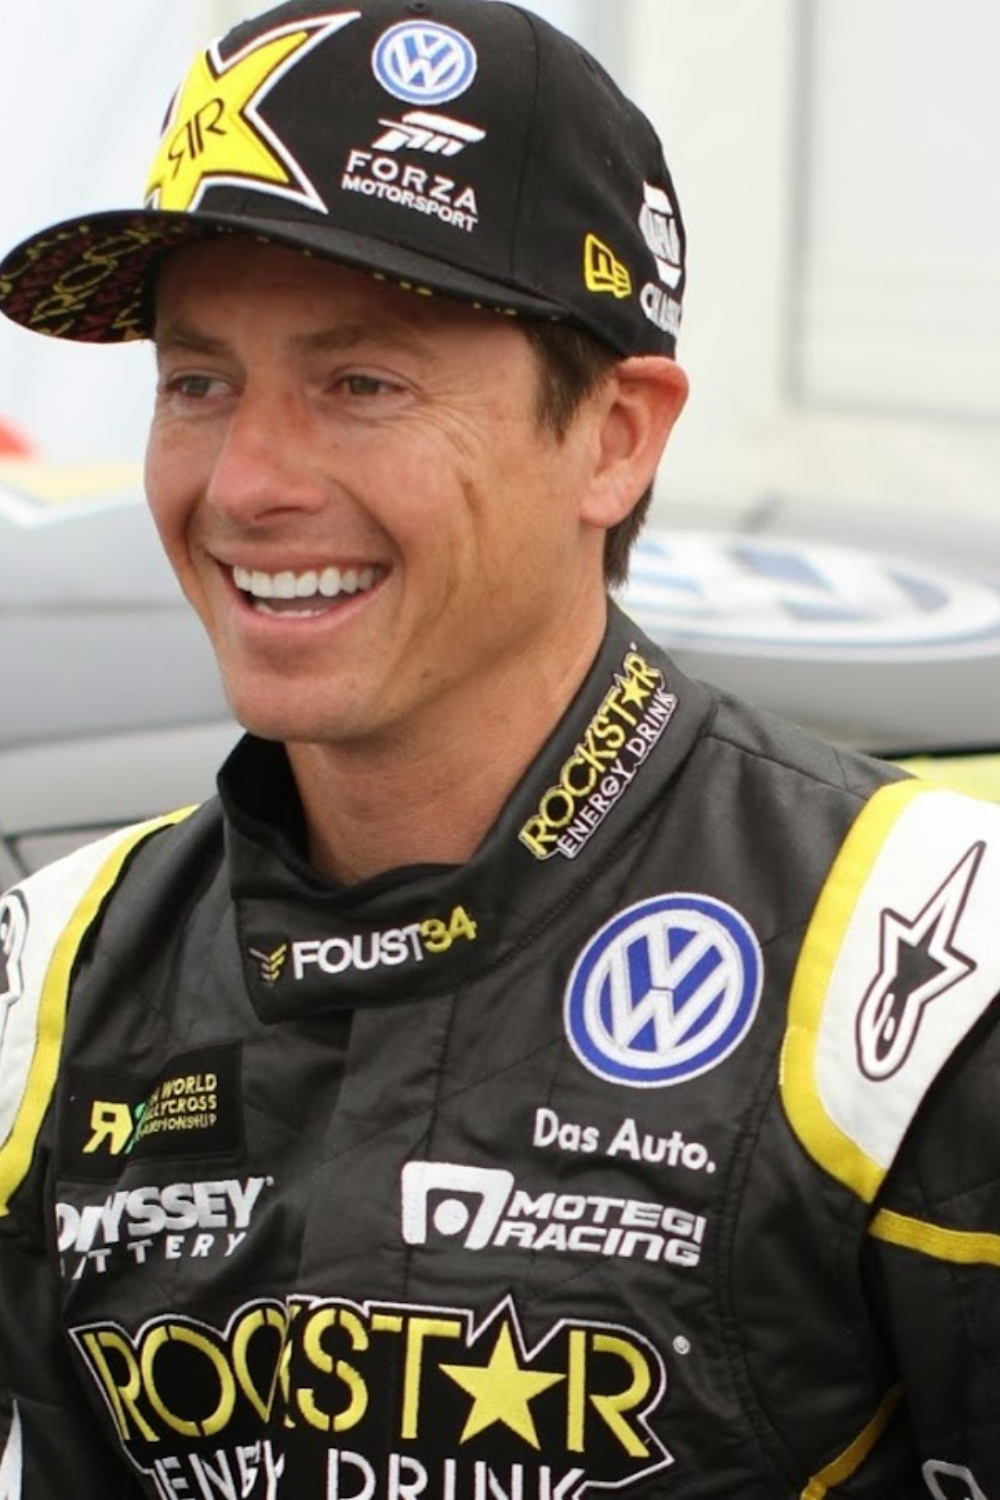 Tanner Foust, An American Professional Raving Driver